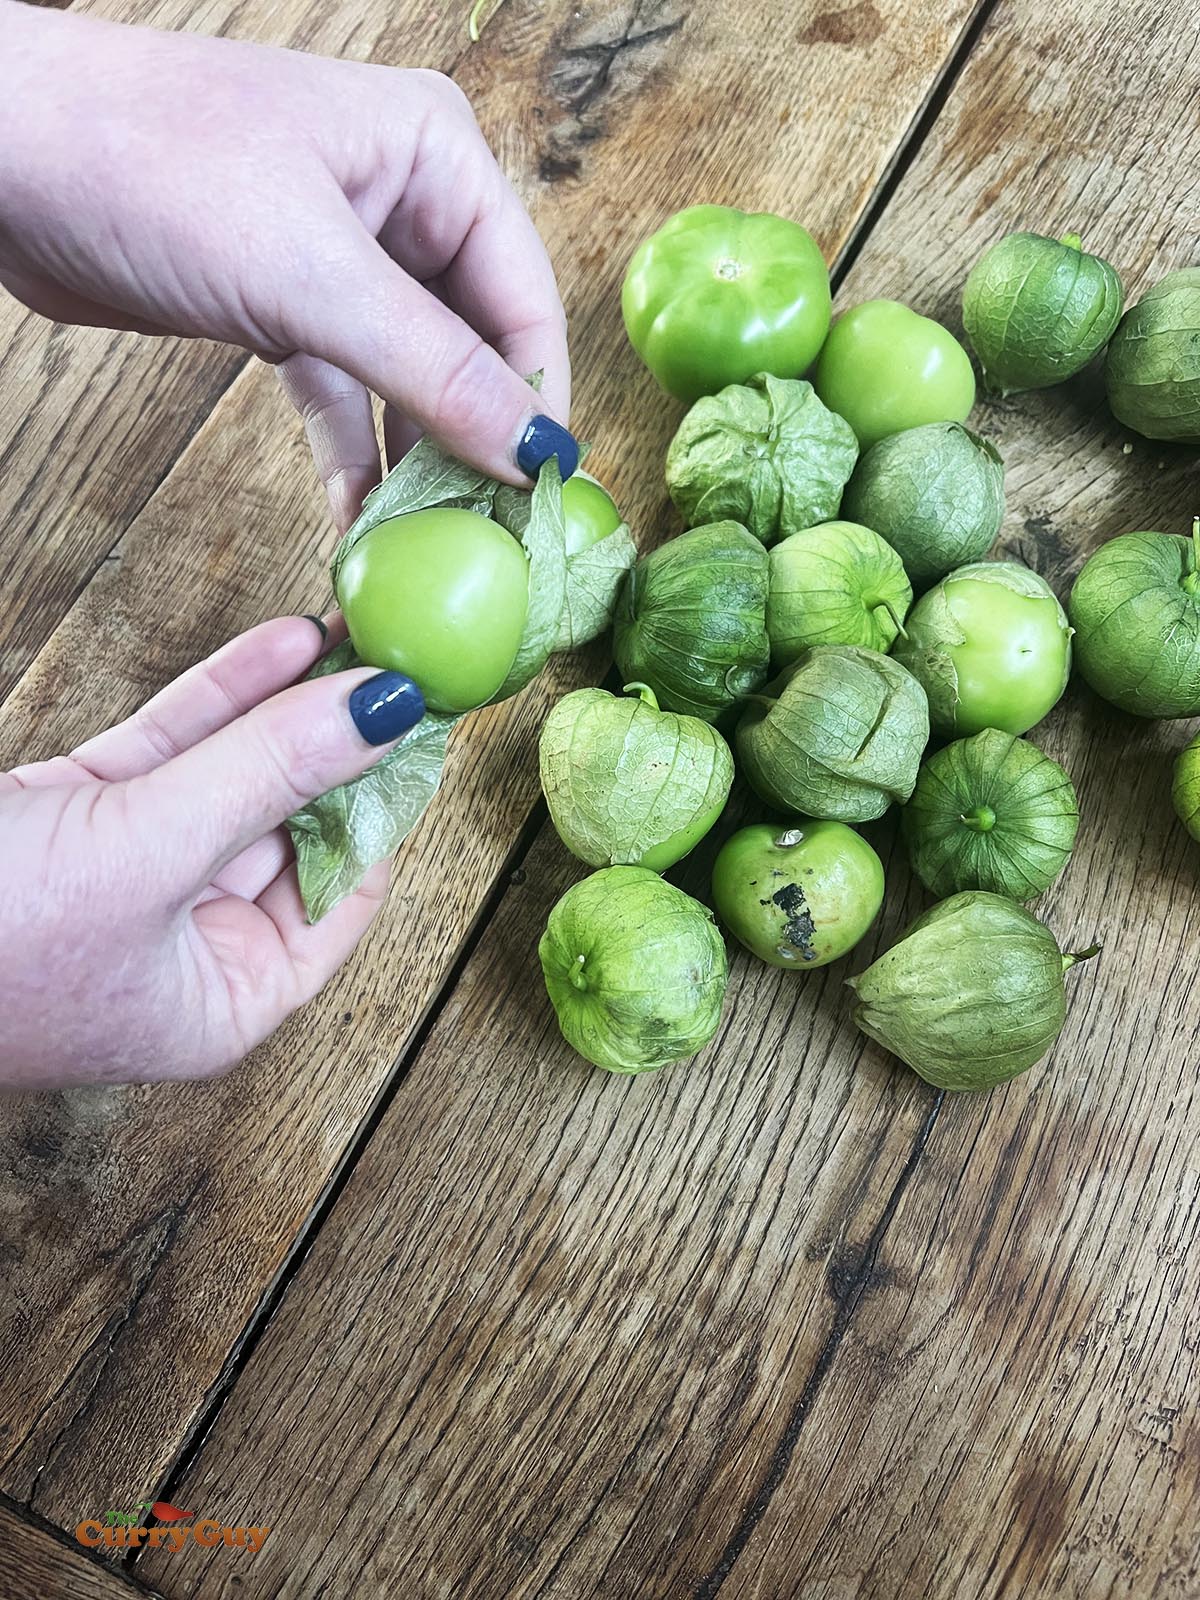 Removing the husks from the tomatillos